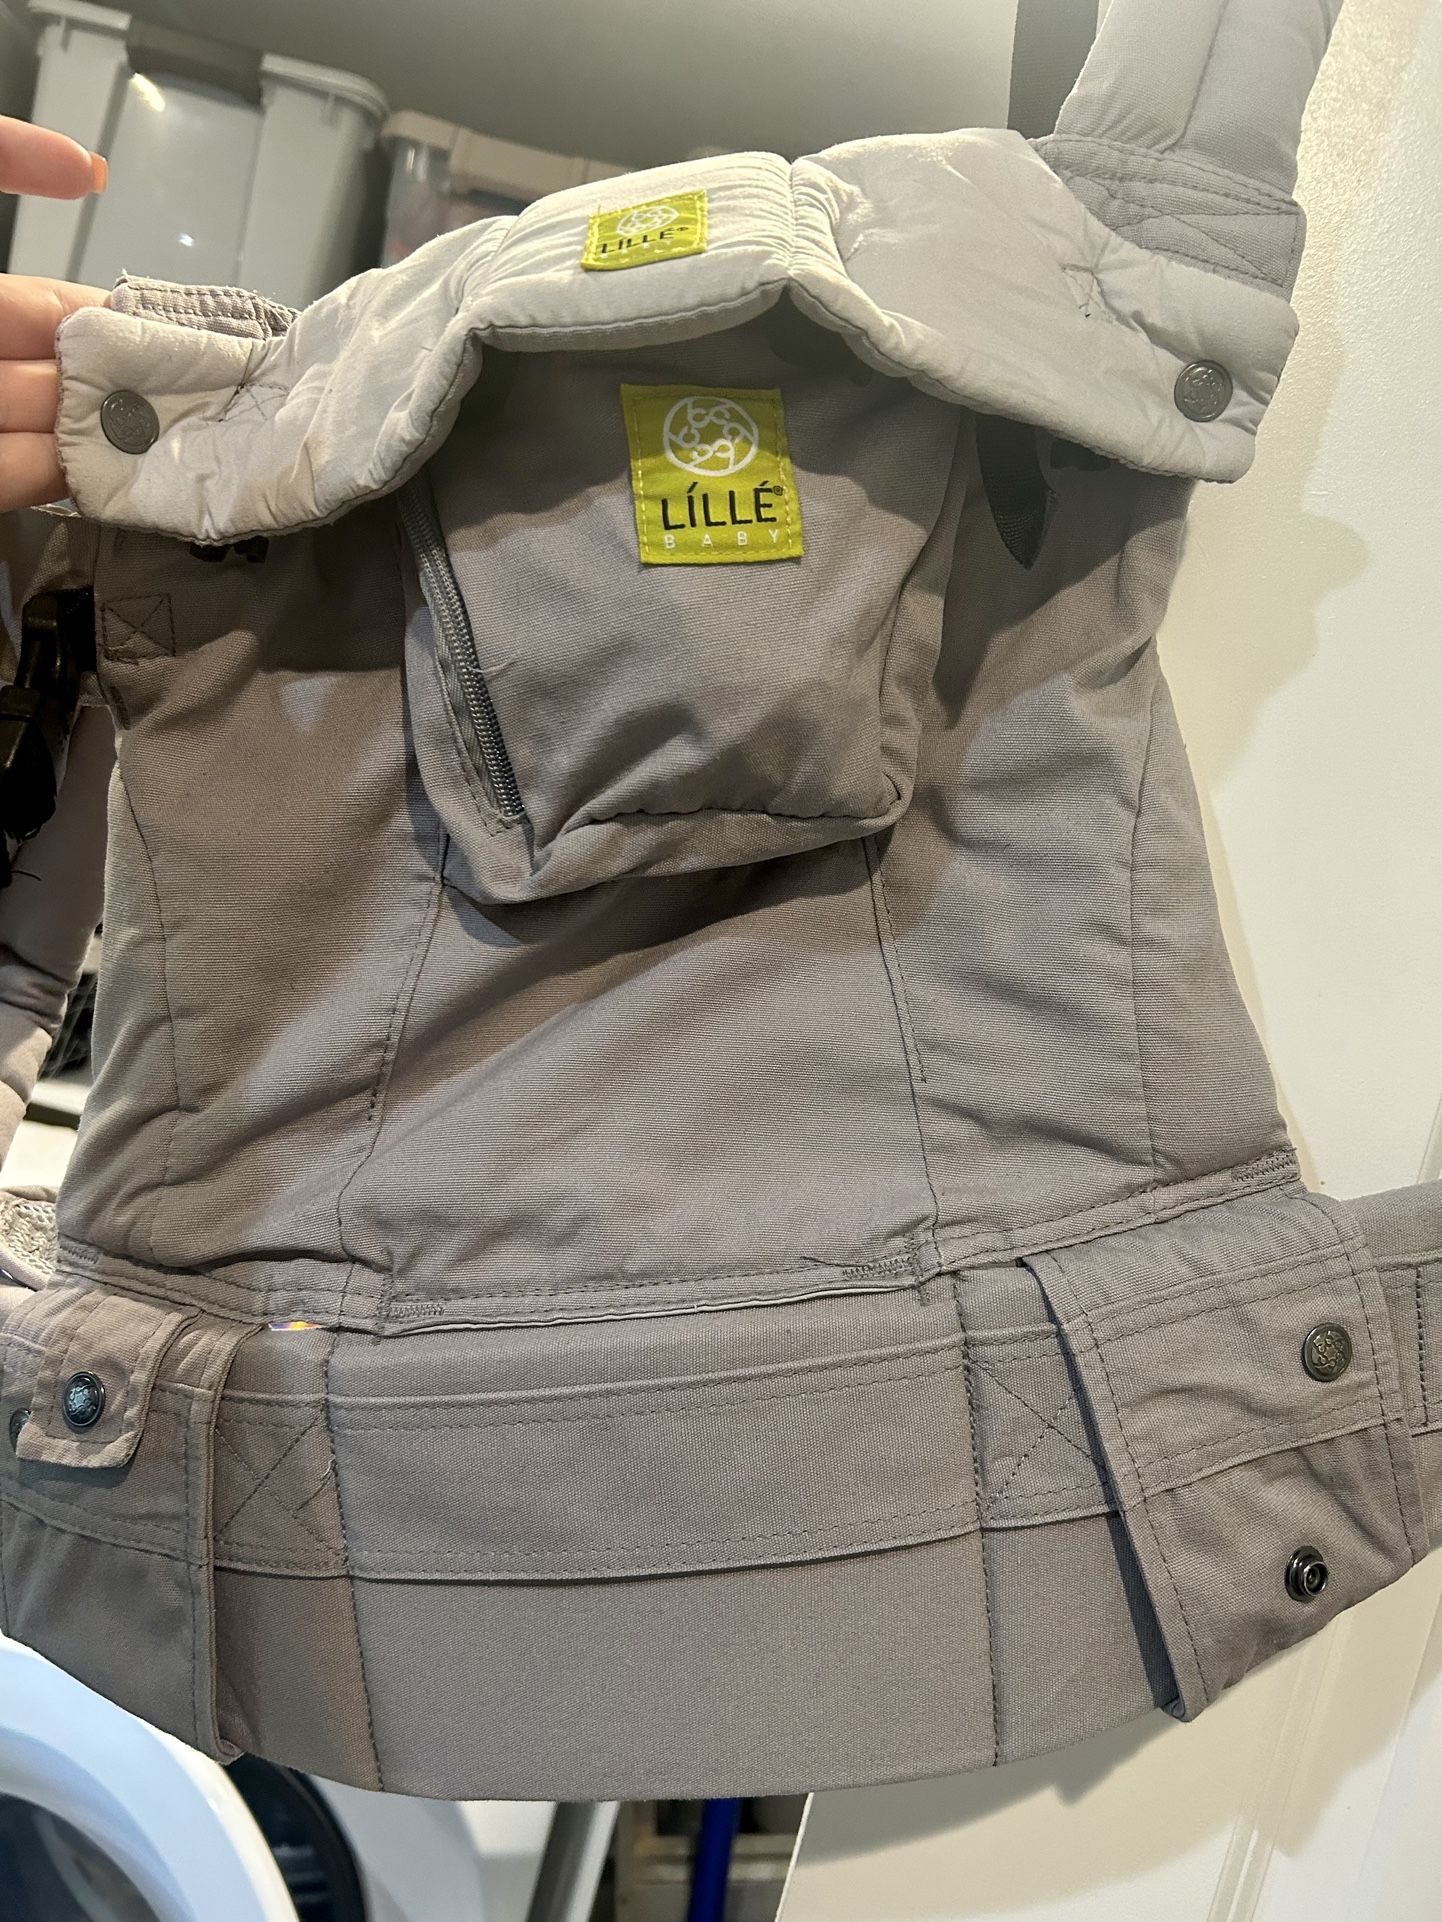 Lille baby Carrier